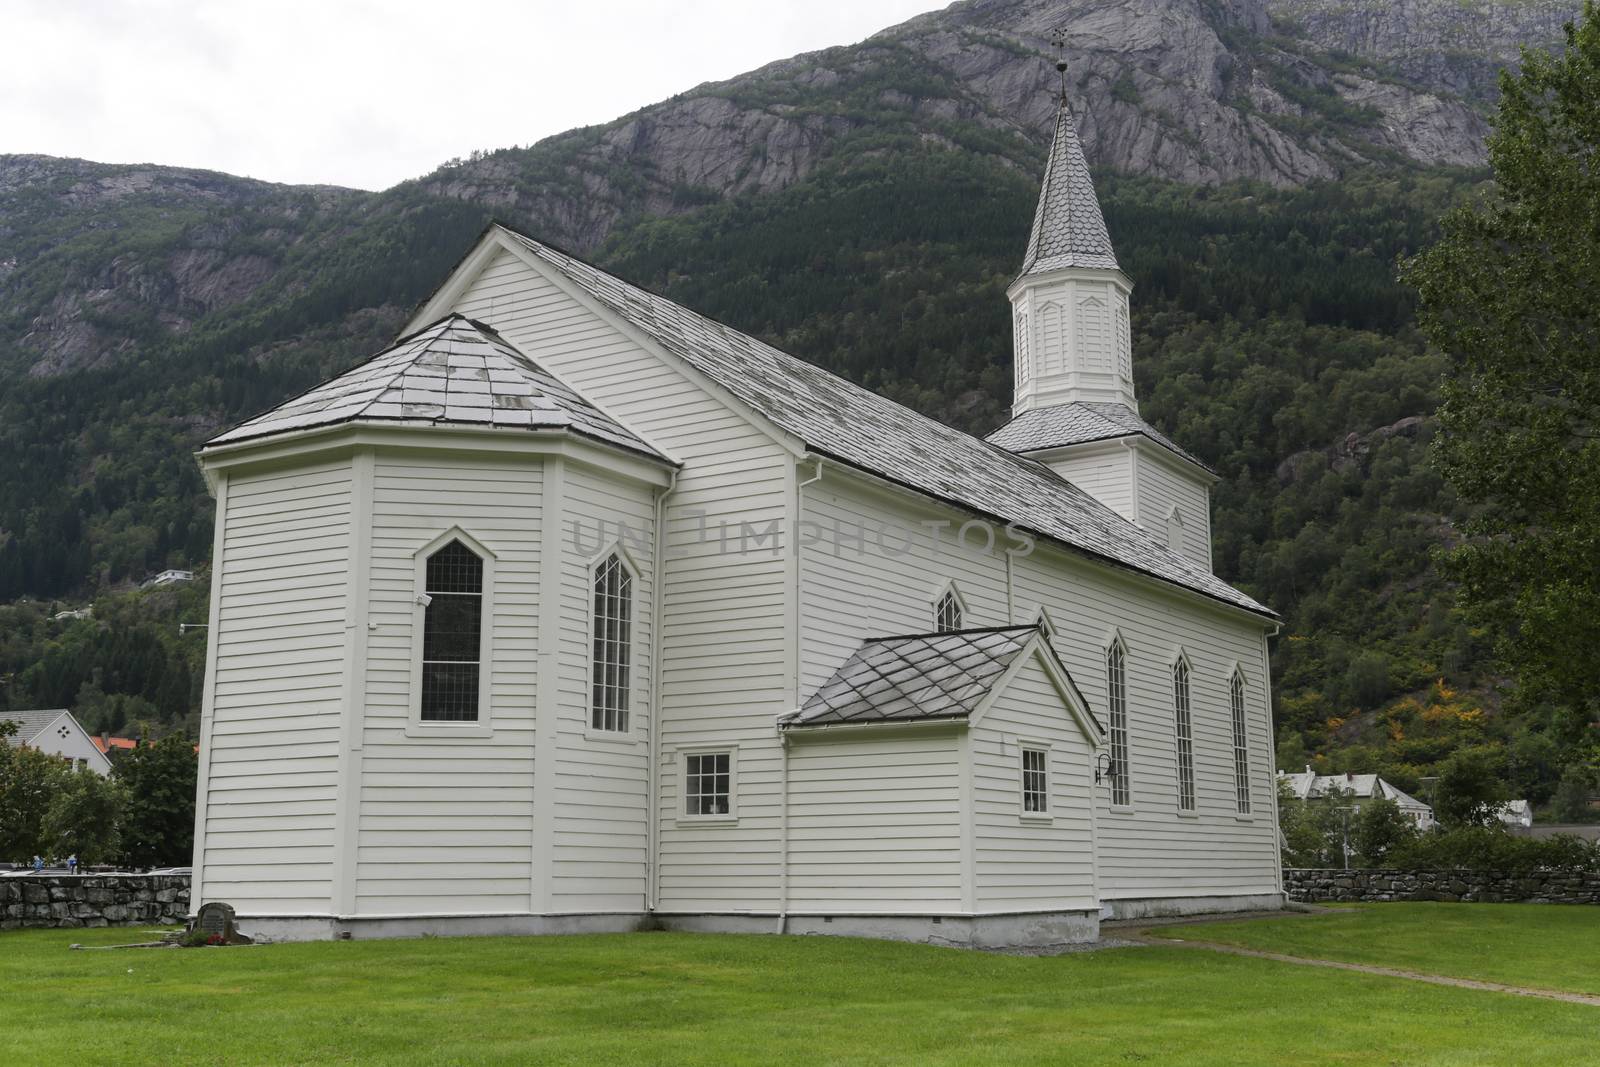 The old white church with tower in Odda